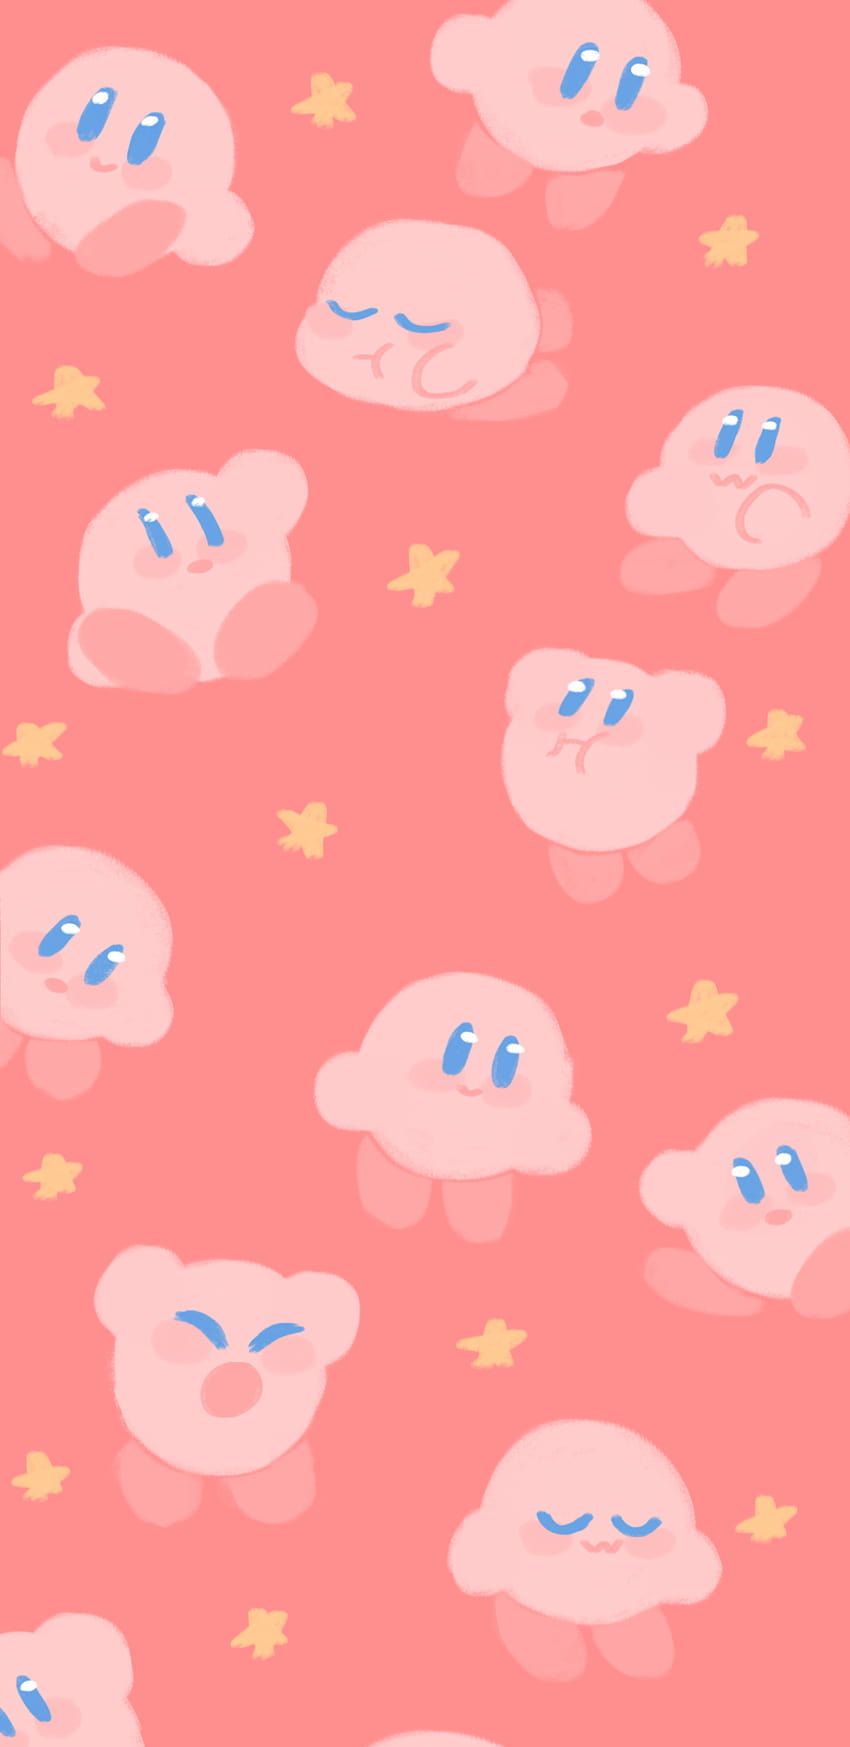 A pattern of pink and blue characters - Nintendo, Kirby